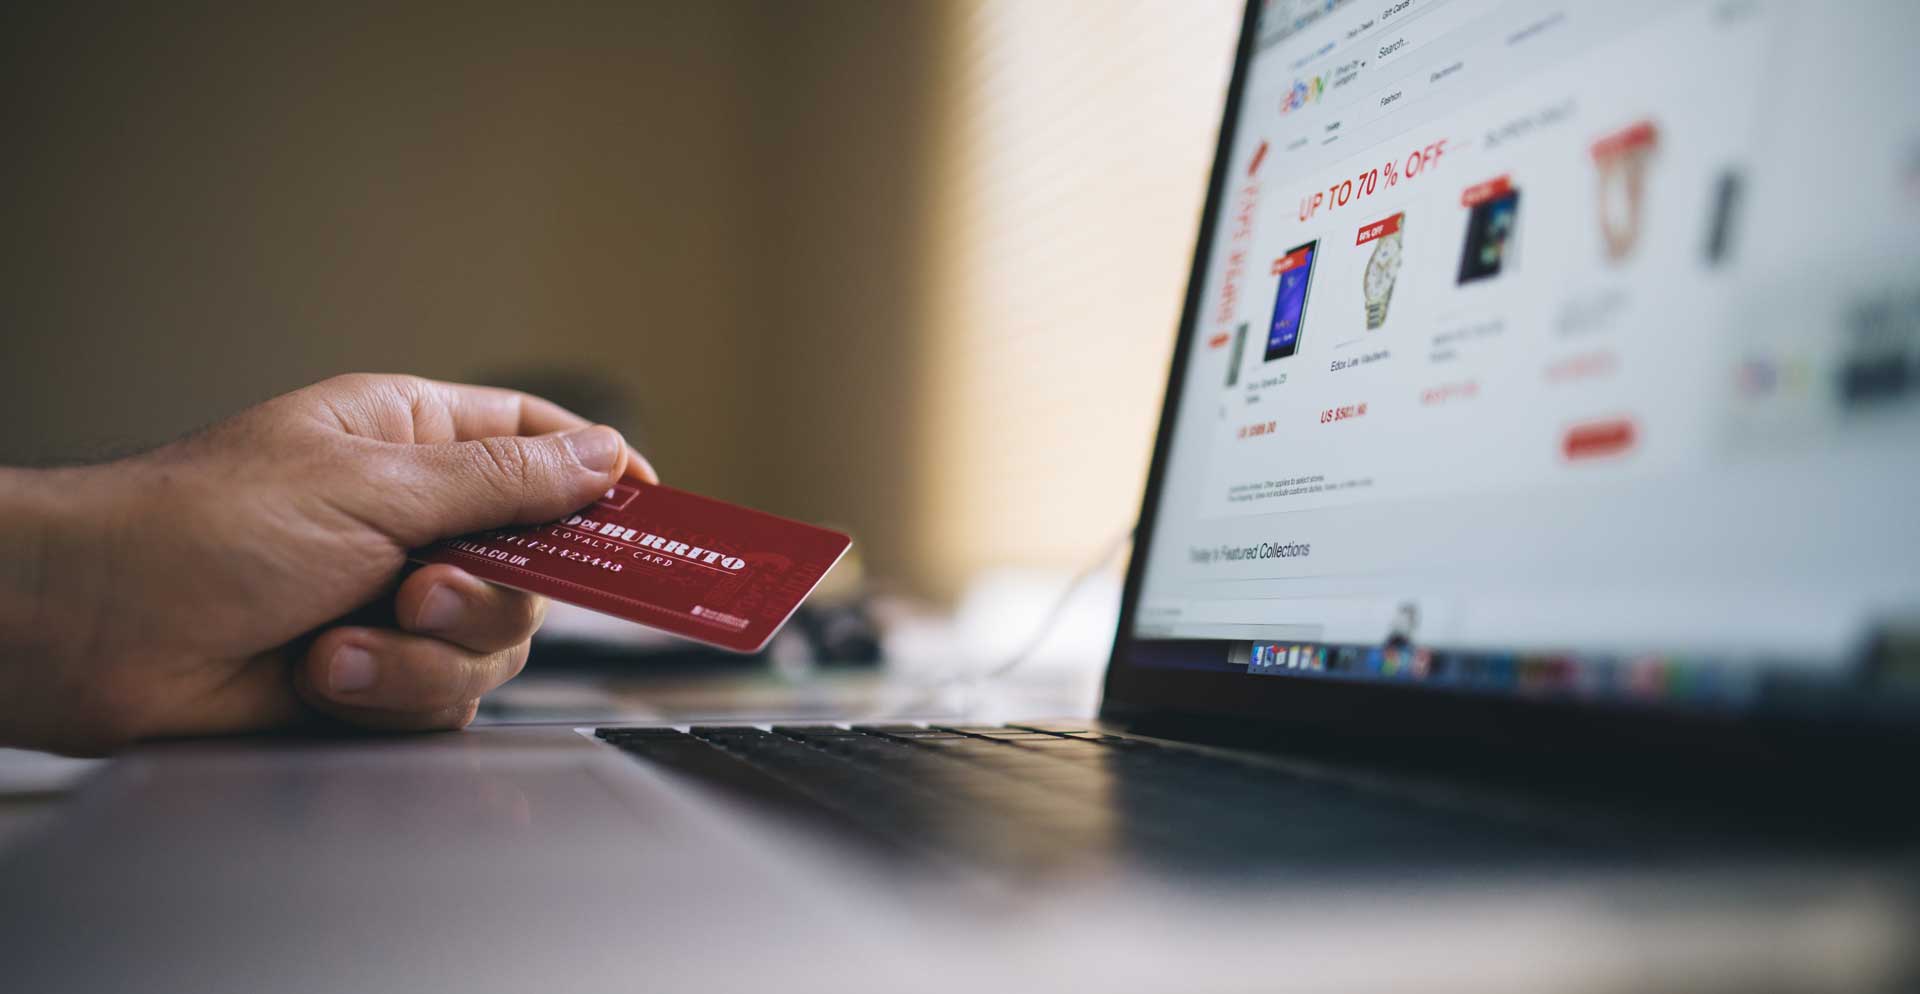 Online Shopping: Are You Addicted Yet?